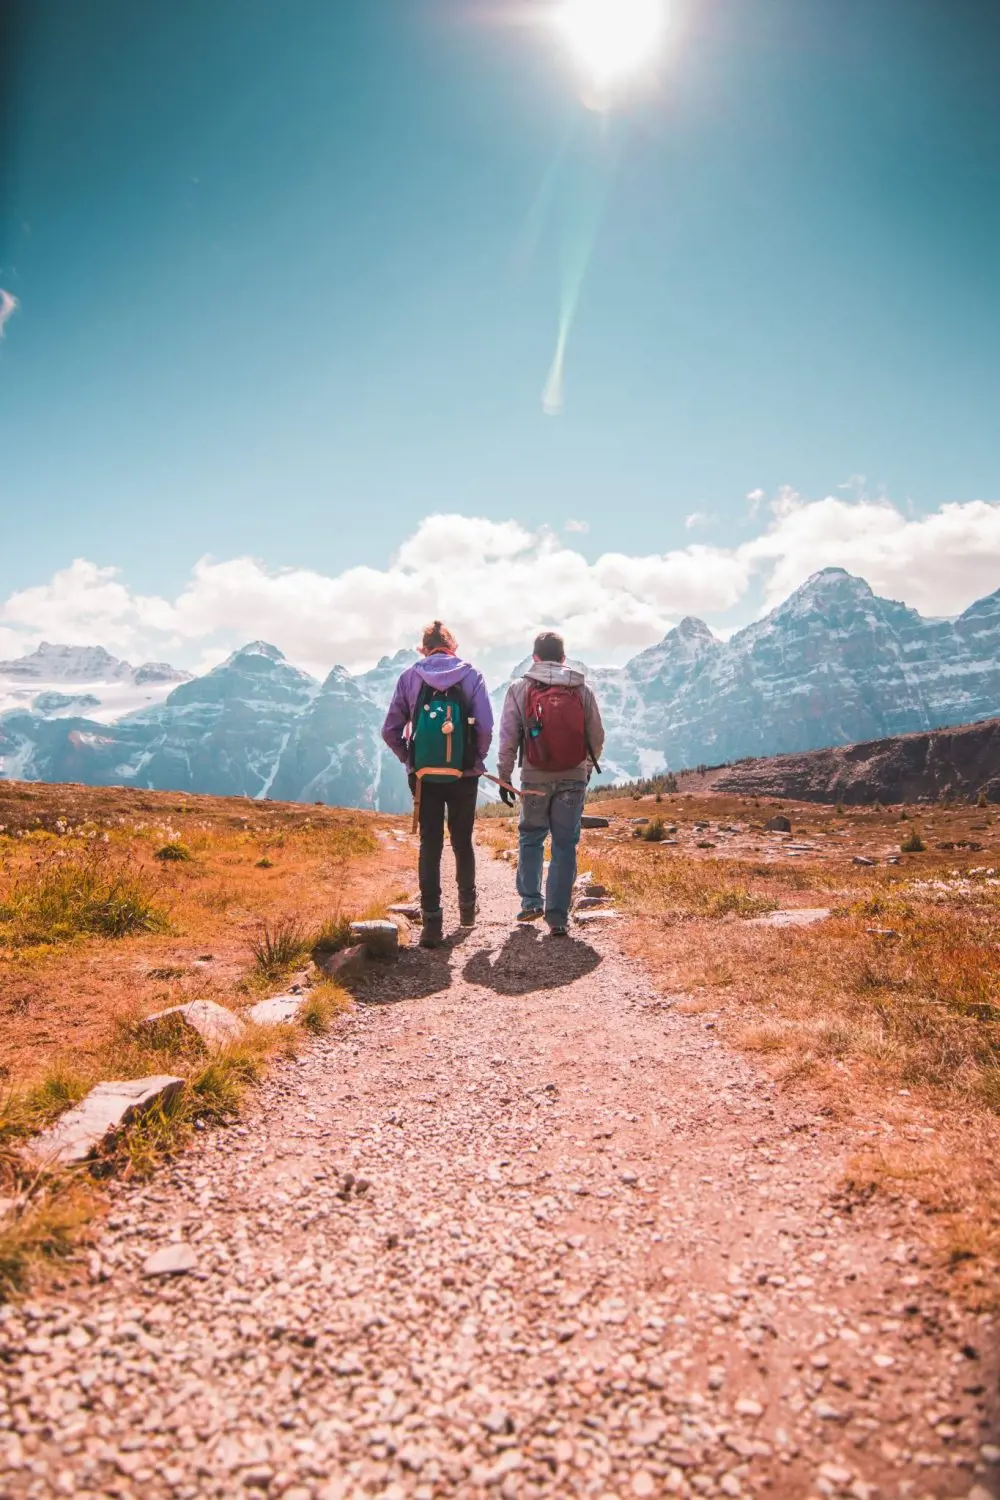 Hiking to a breathtaking place with a loved one is a one of the best date ideas.